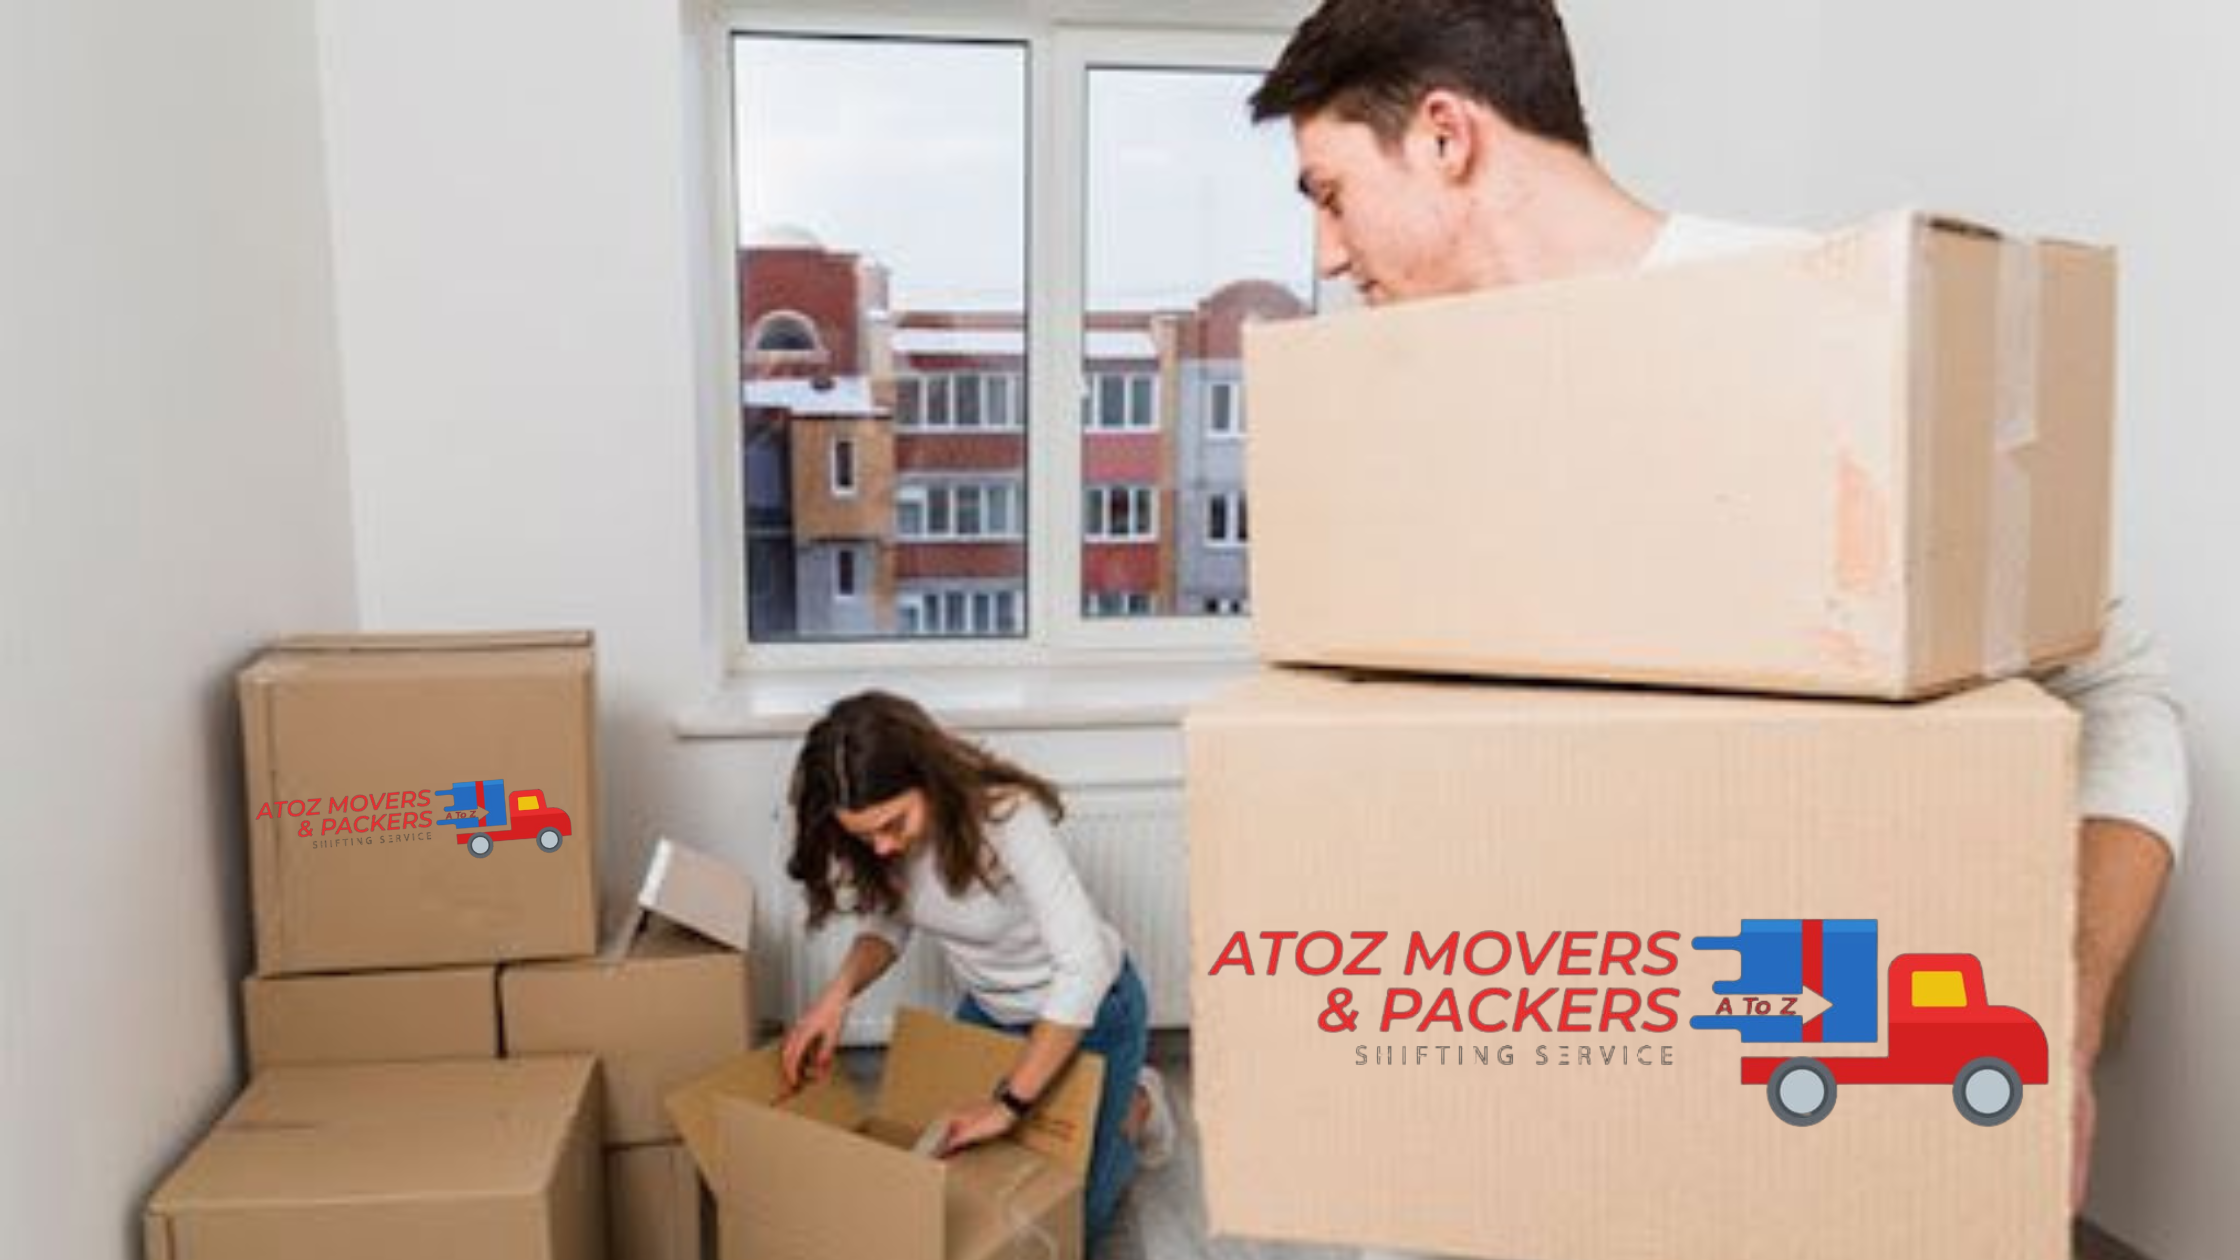 MOVERS AND PACKERS IN SPRINGS